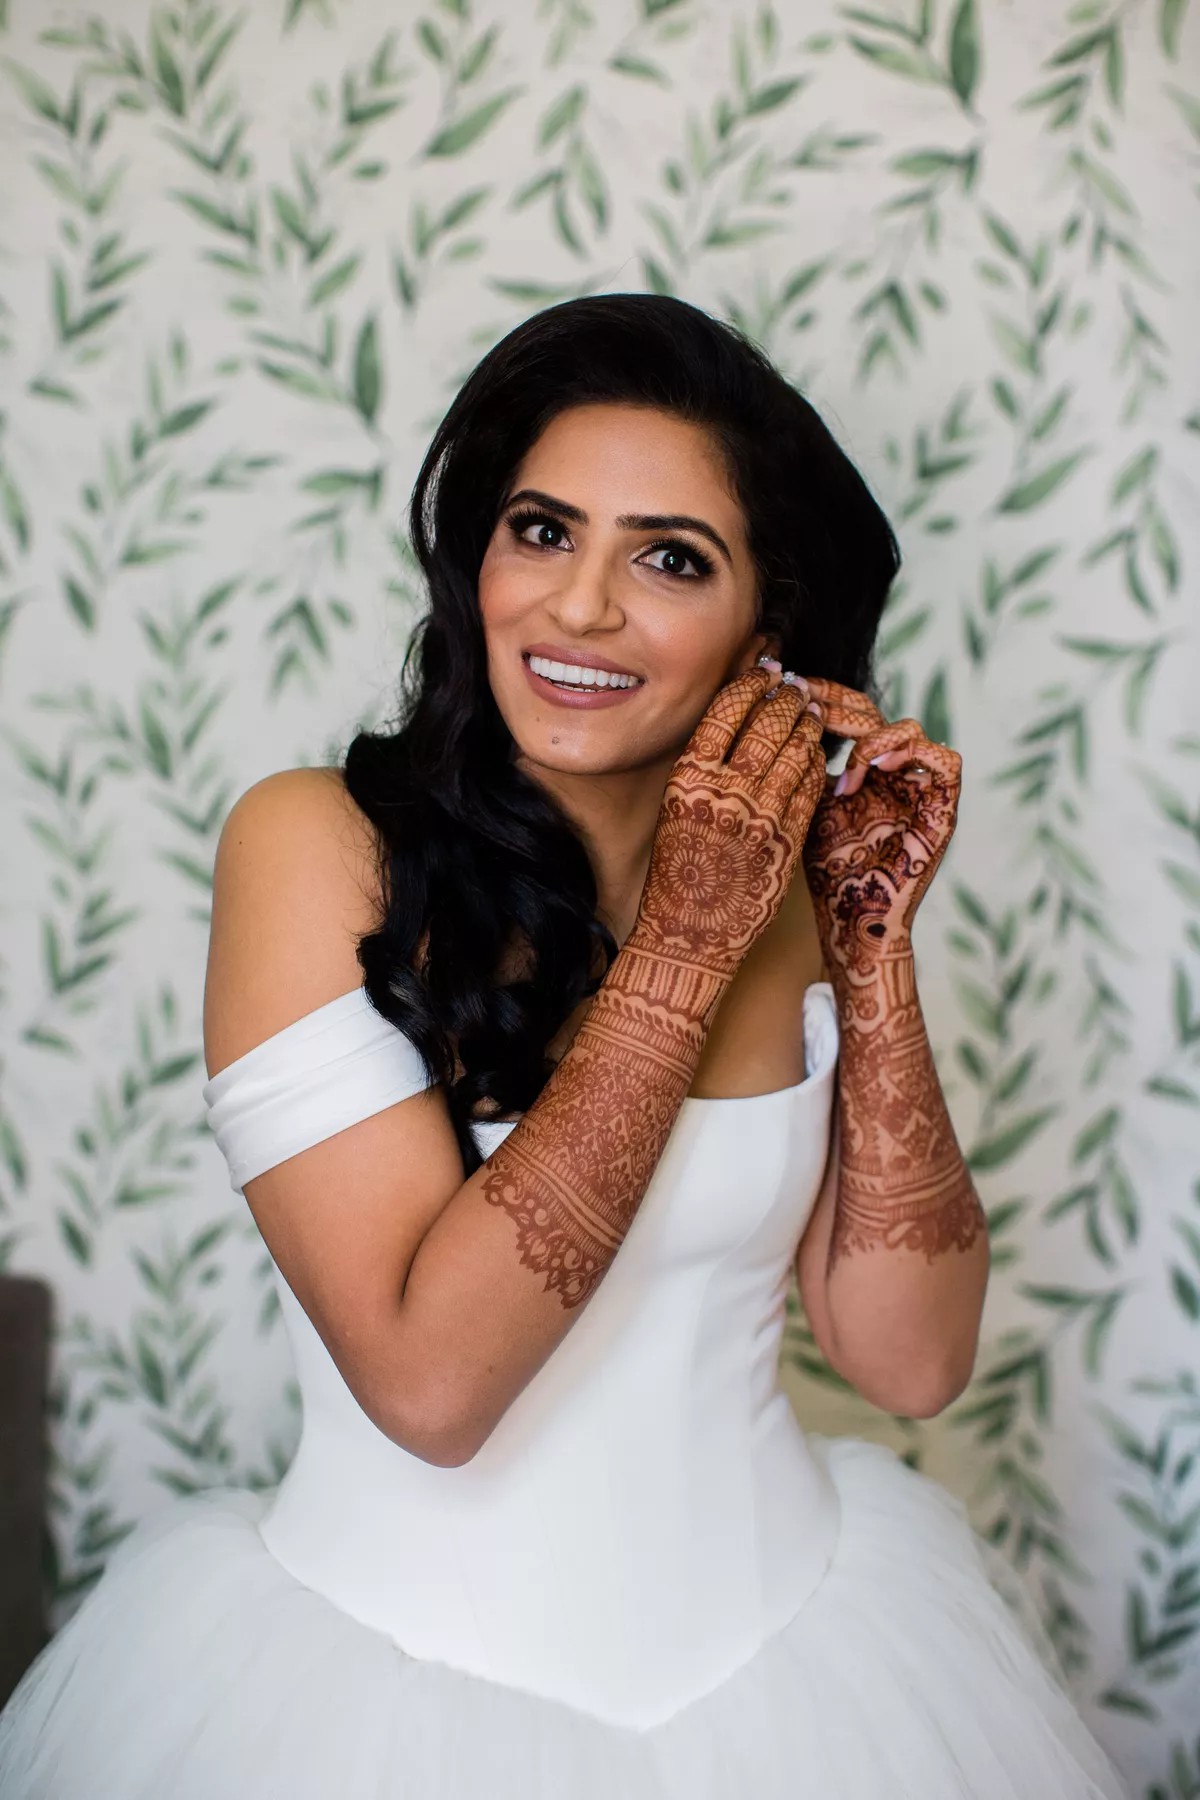 22 Beautiful & Effortless Natural Wedding Looks To Complete Your Wedding Day Vision